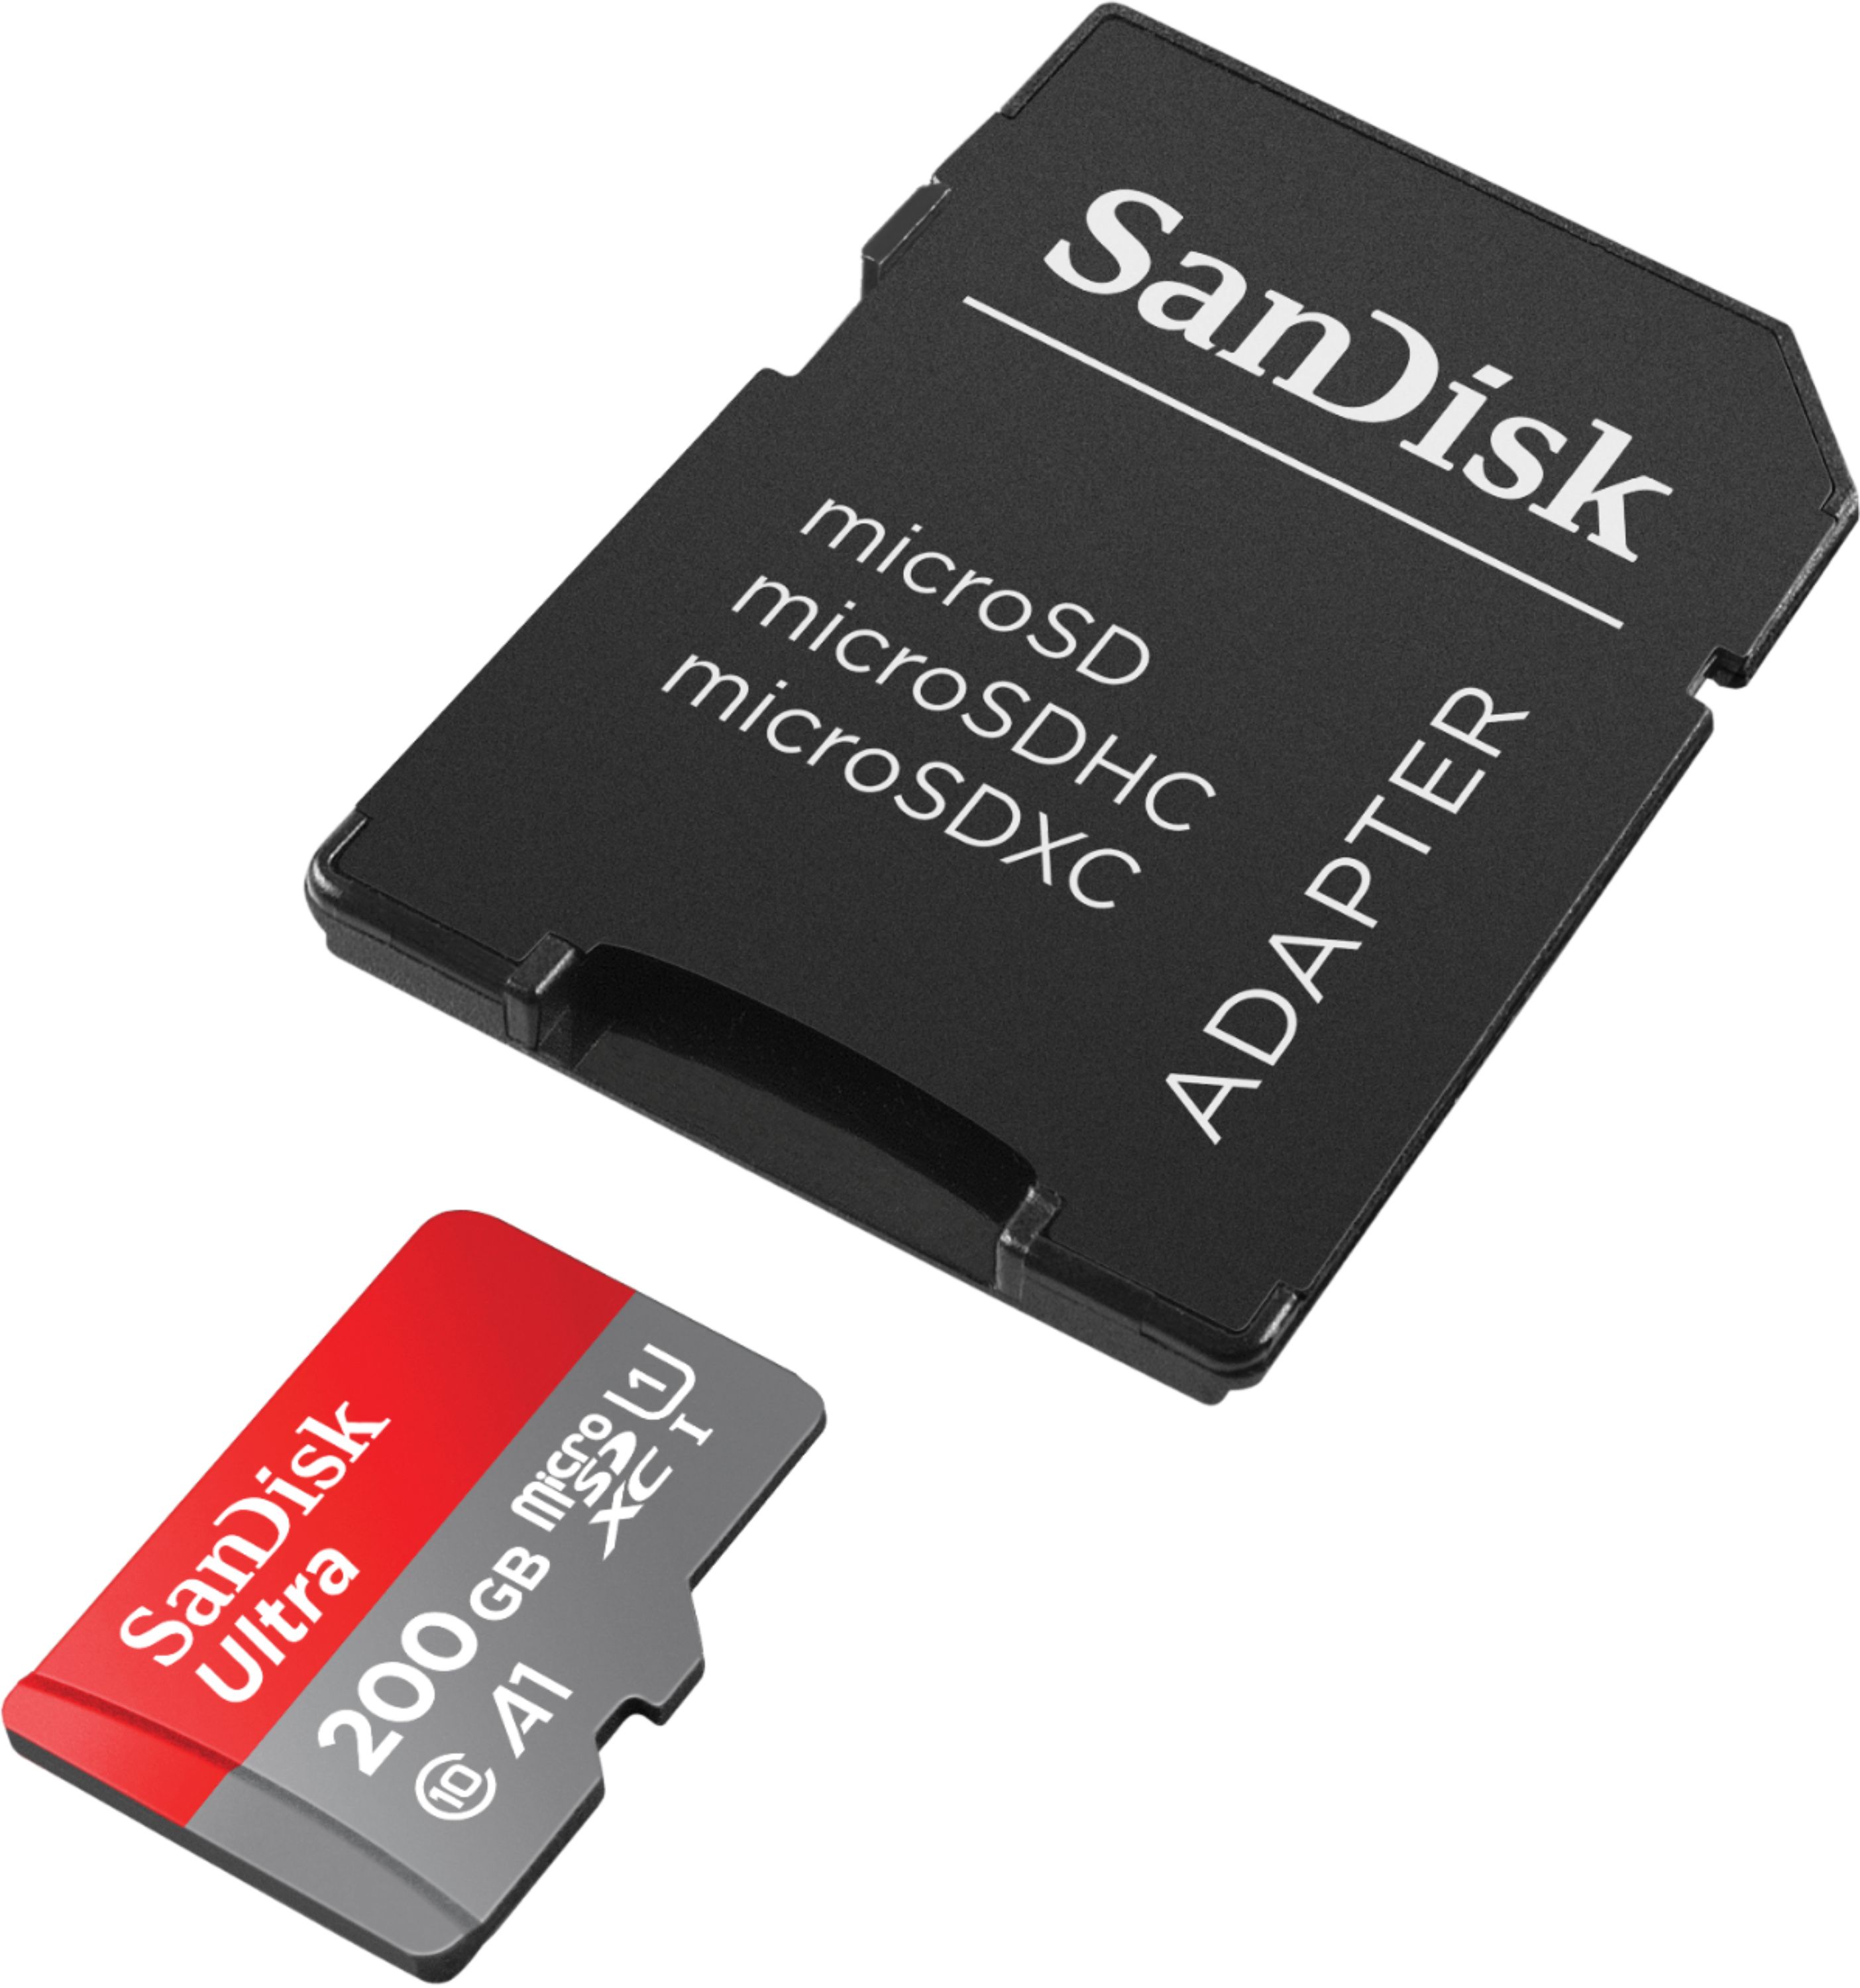 100MBs A1 U1 C10 Works with SanDisk SanDisk Ultra 200GB MicroSDXC Verified for Micromax X089 by SanFlash 